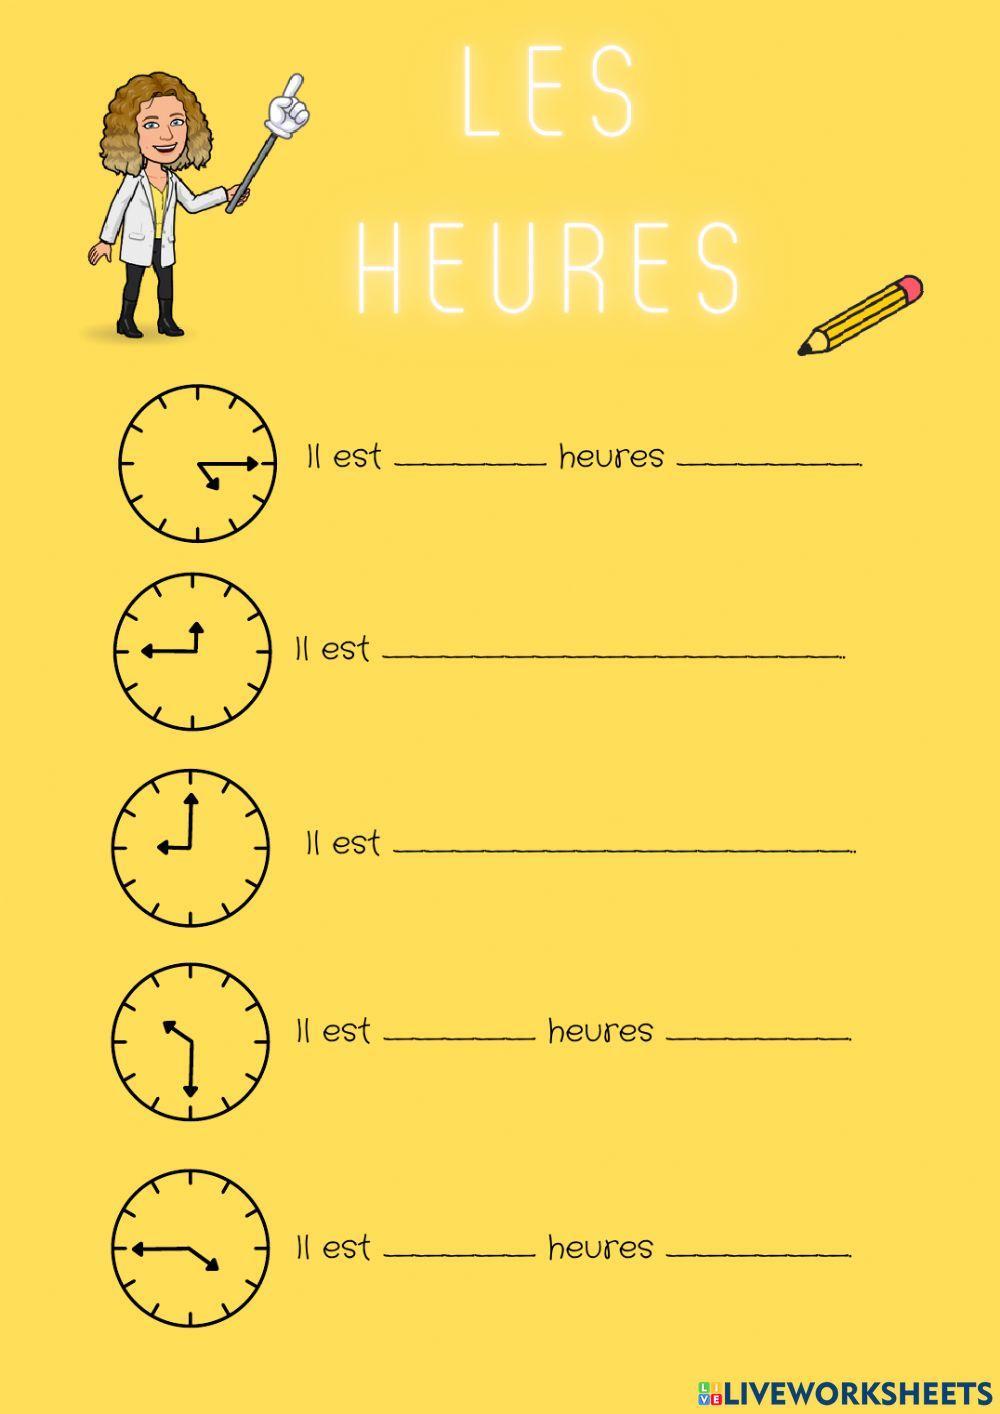 Les heures